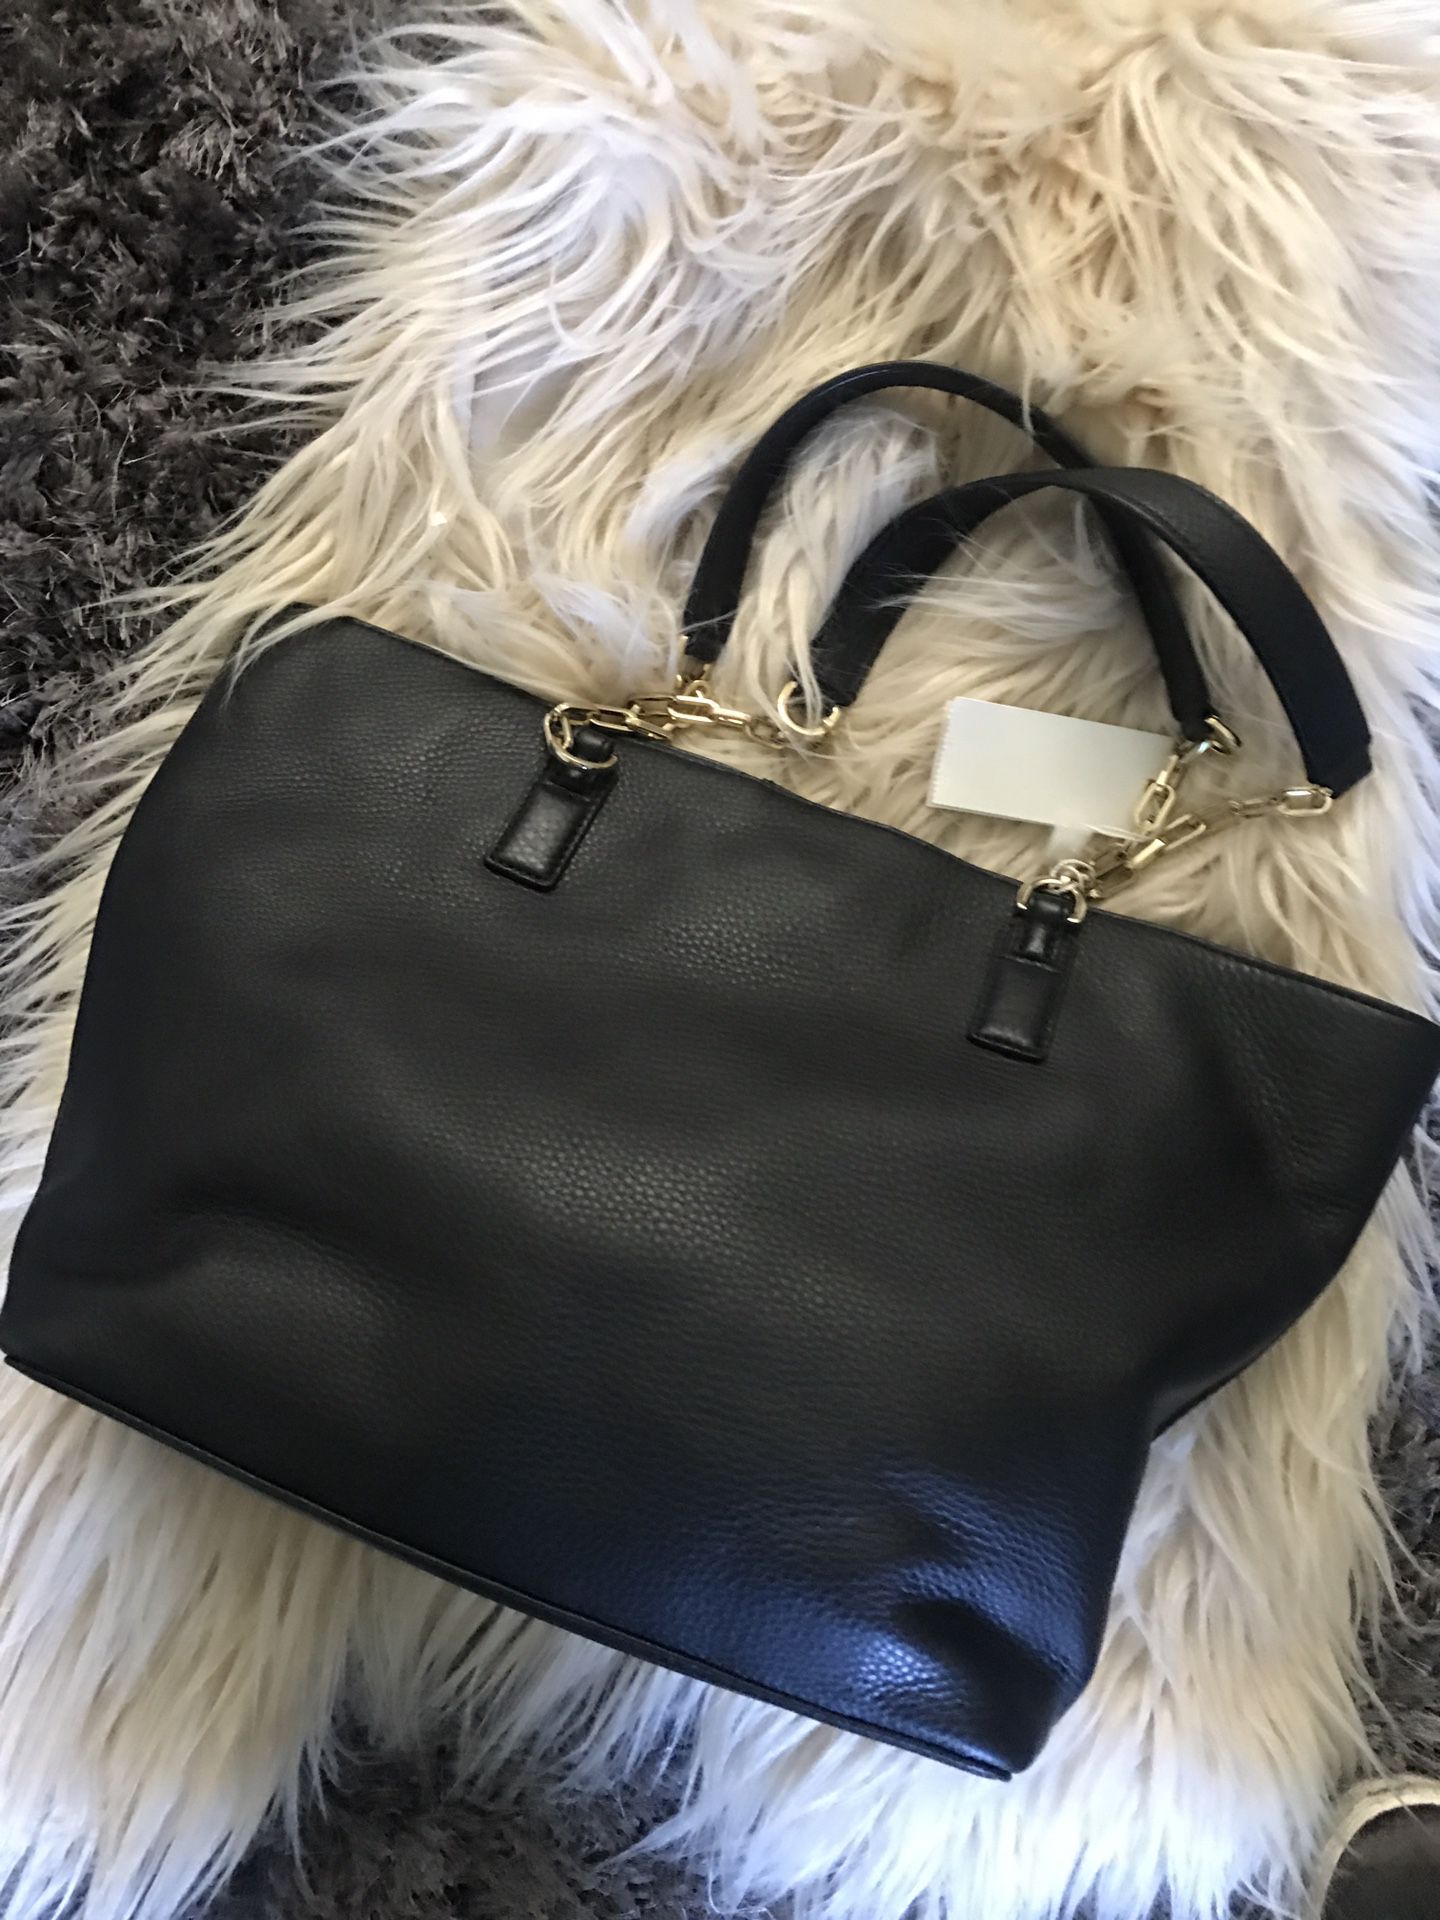 Tori Burch Large Bag for Sale in Chino, CA - OfferUp